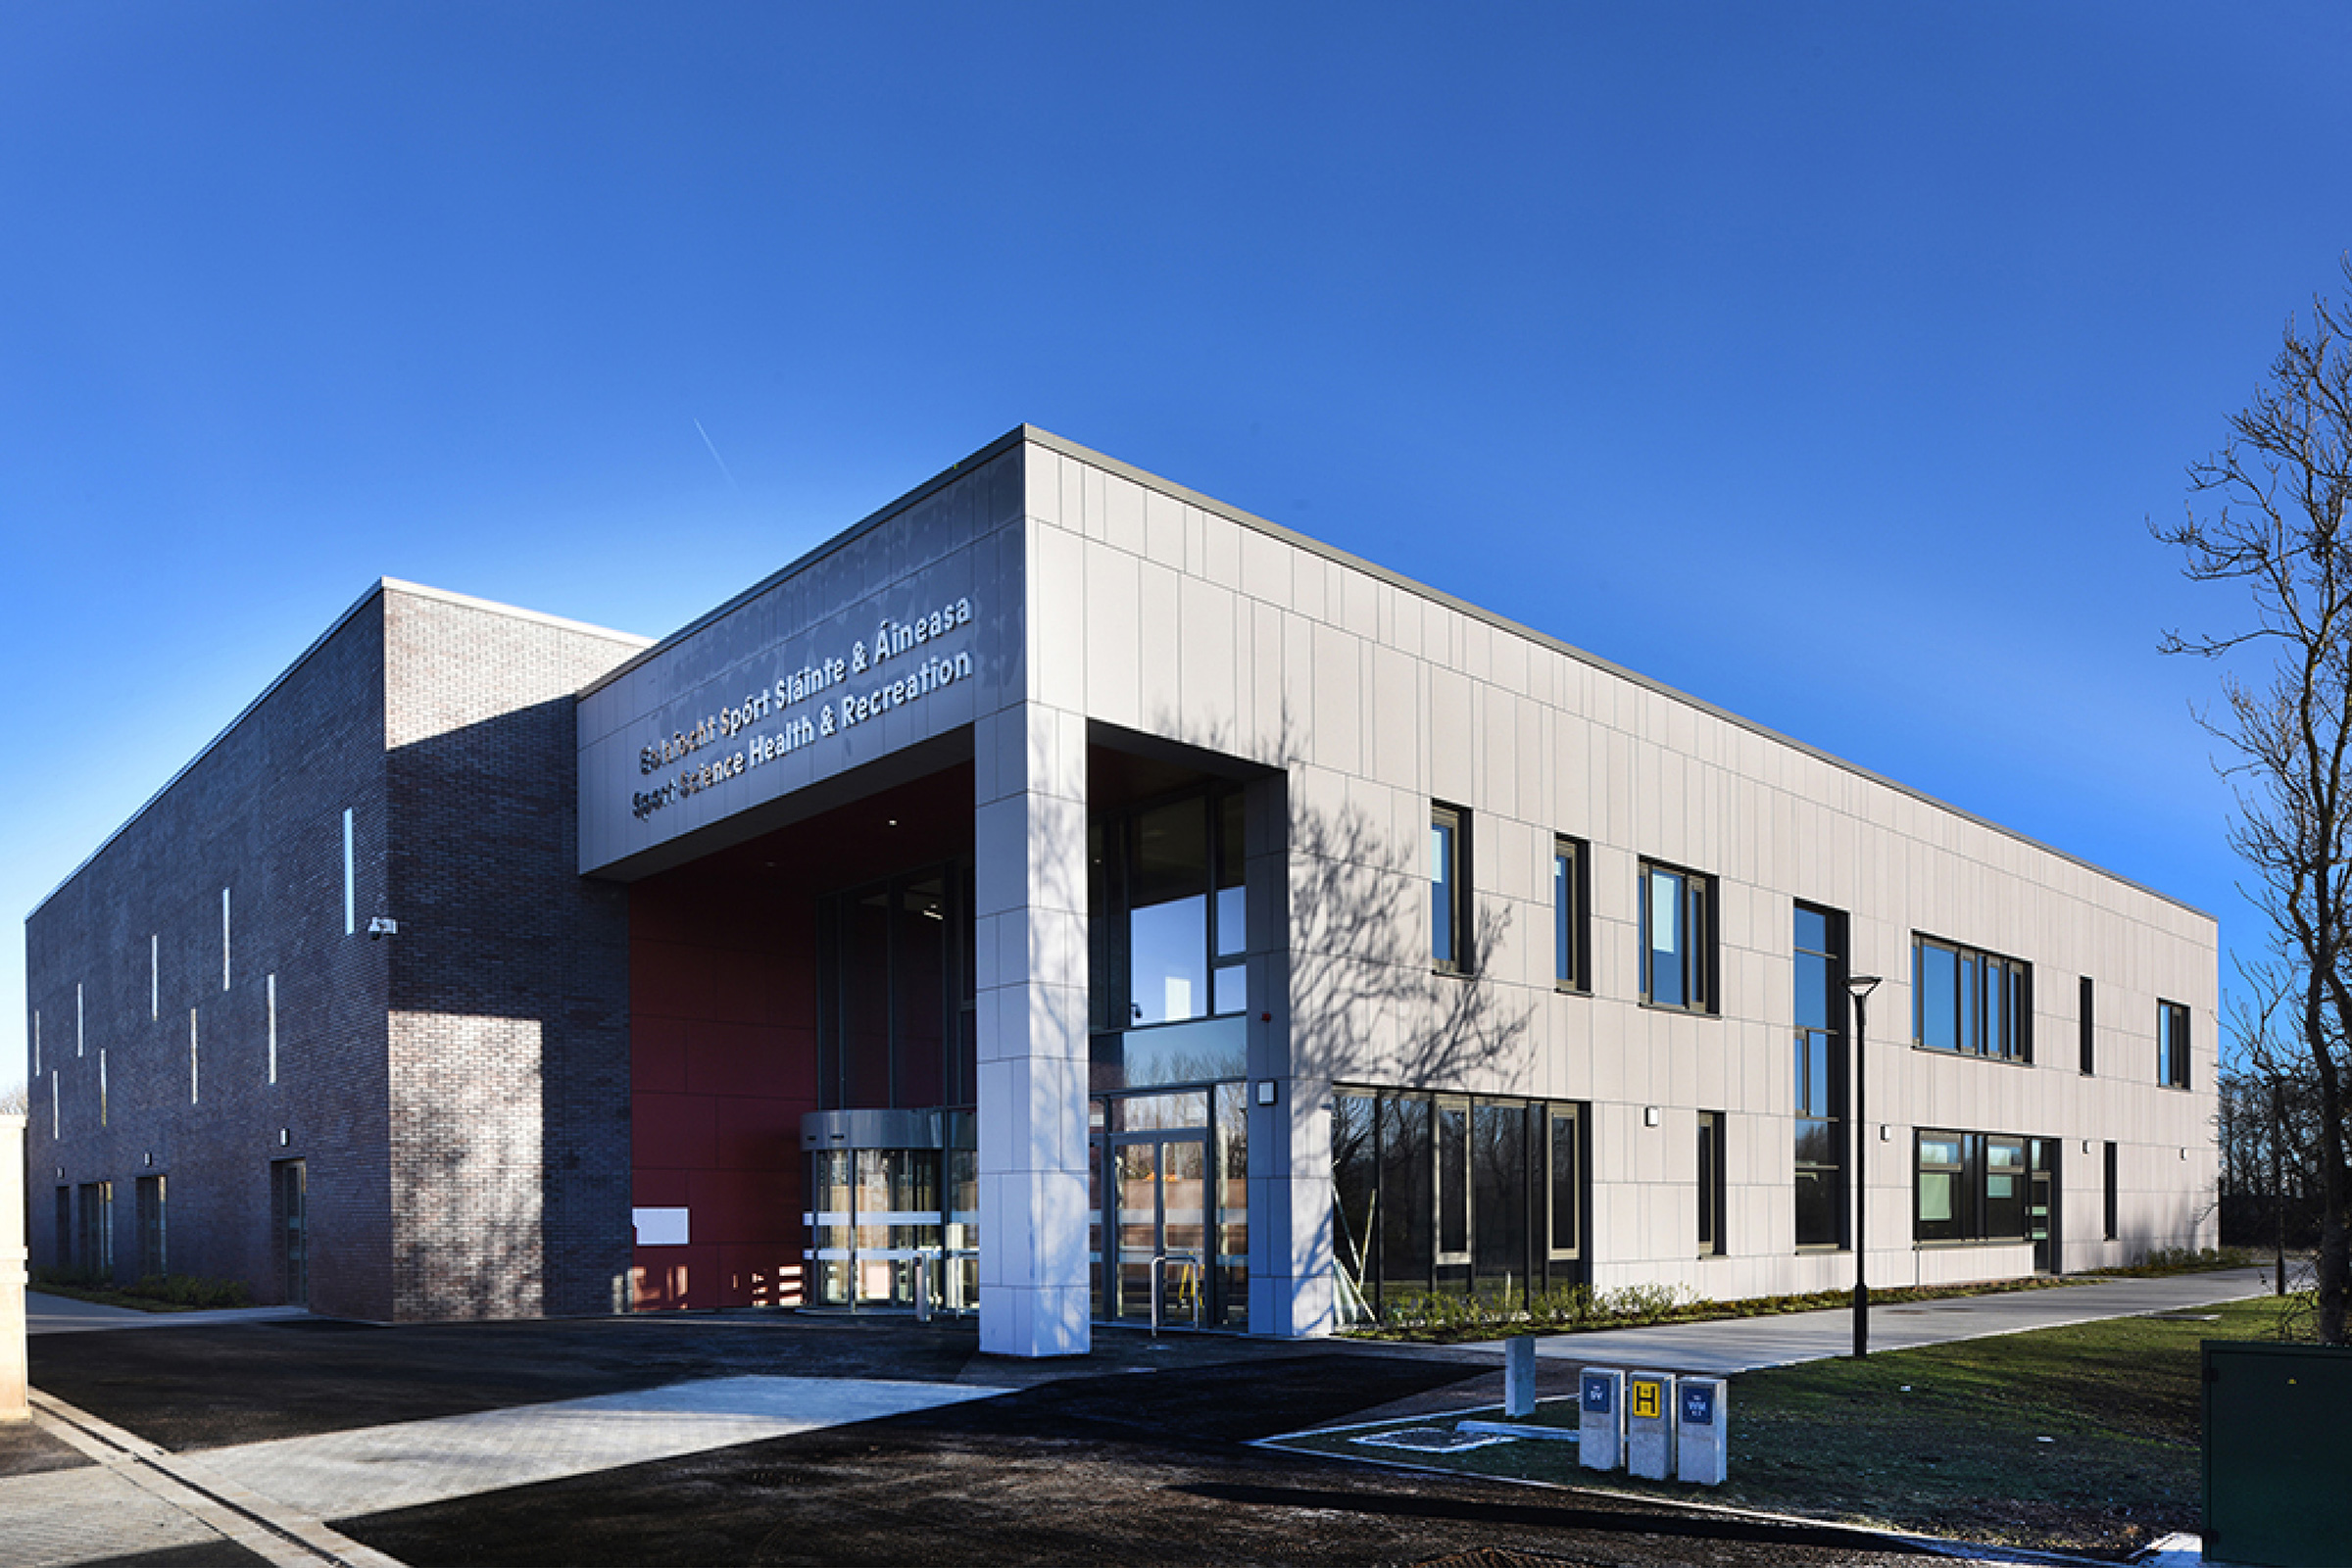 Successful completion & handover of Technological University Dublin (TUD) Tallagh campus – Sports Science Health and Recreation building development